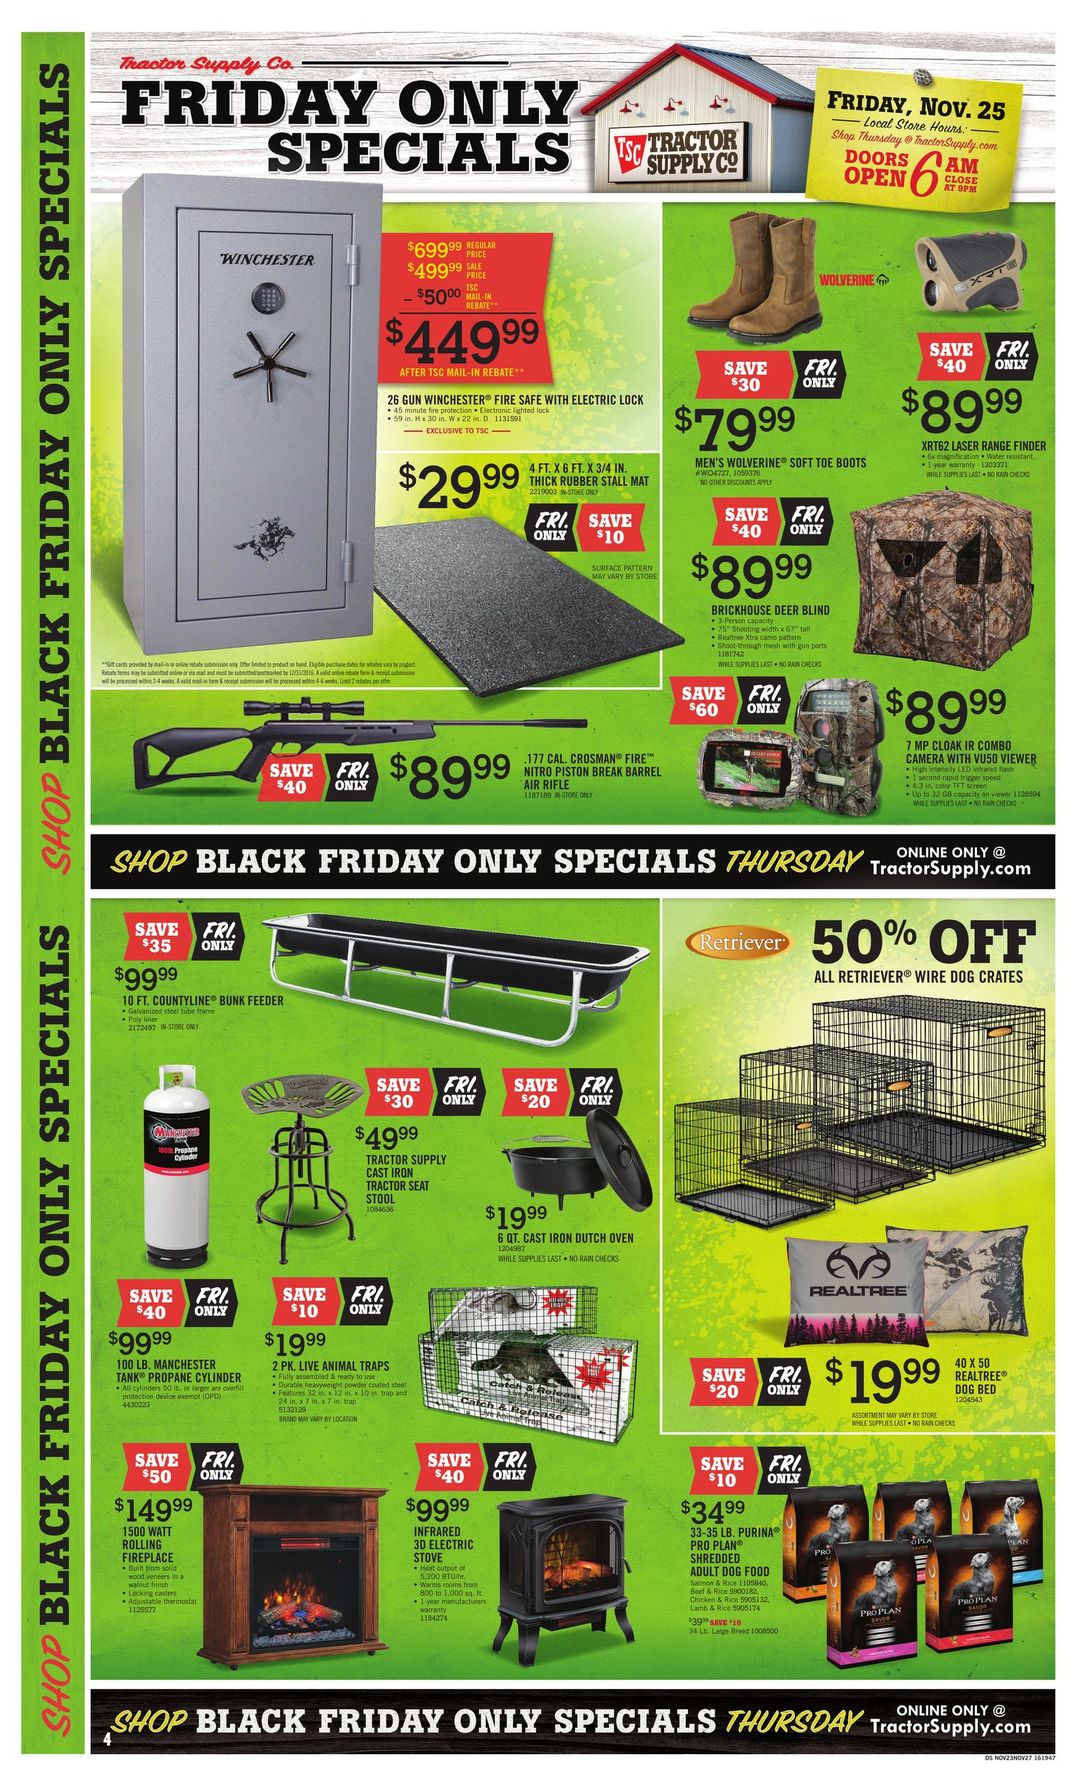 Tractor Supply Black Friday 2016 Ad.